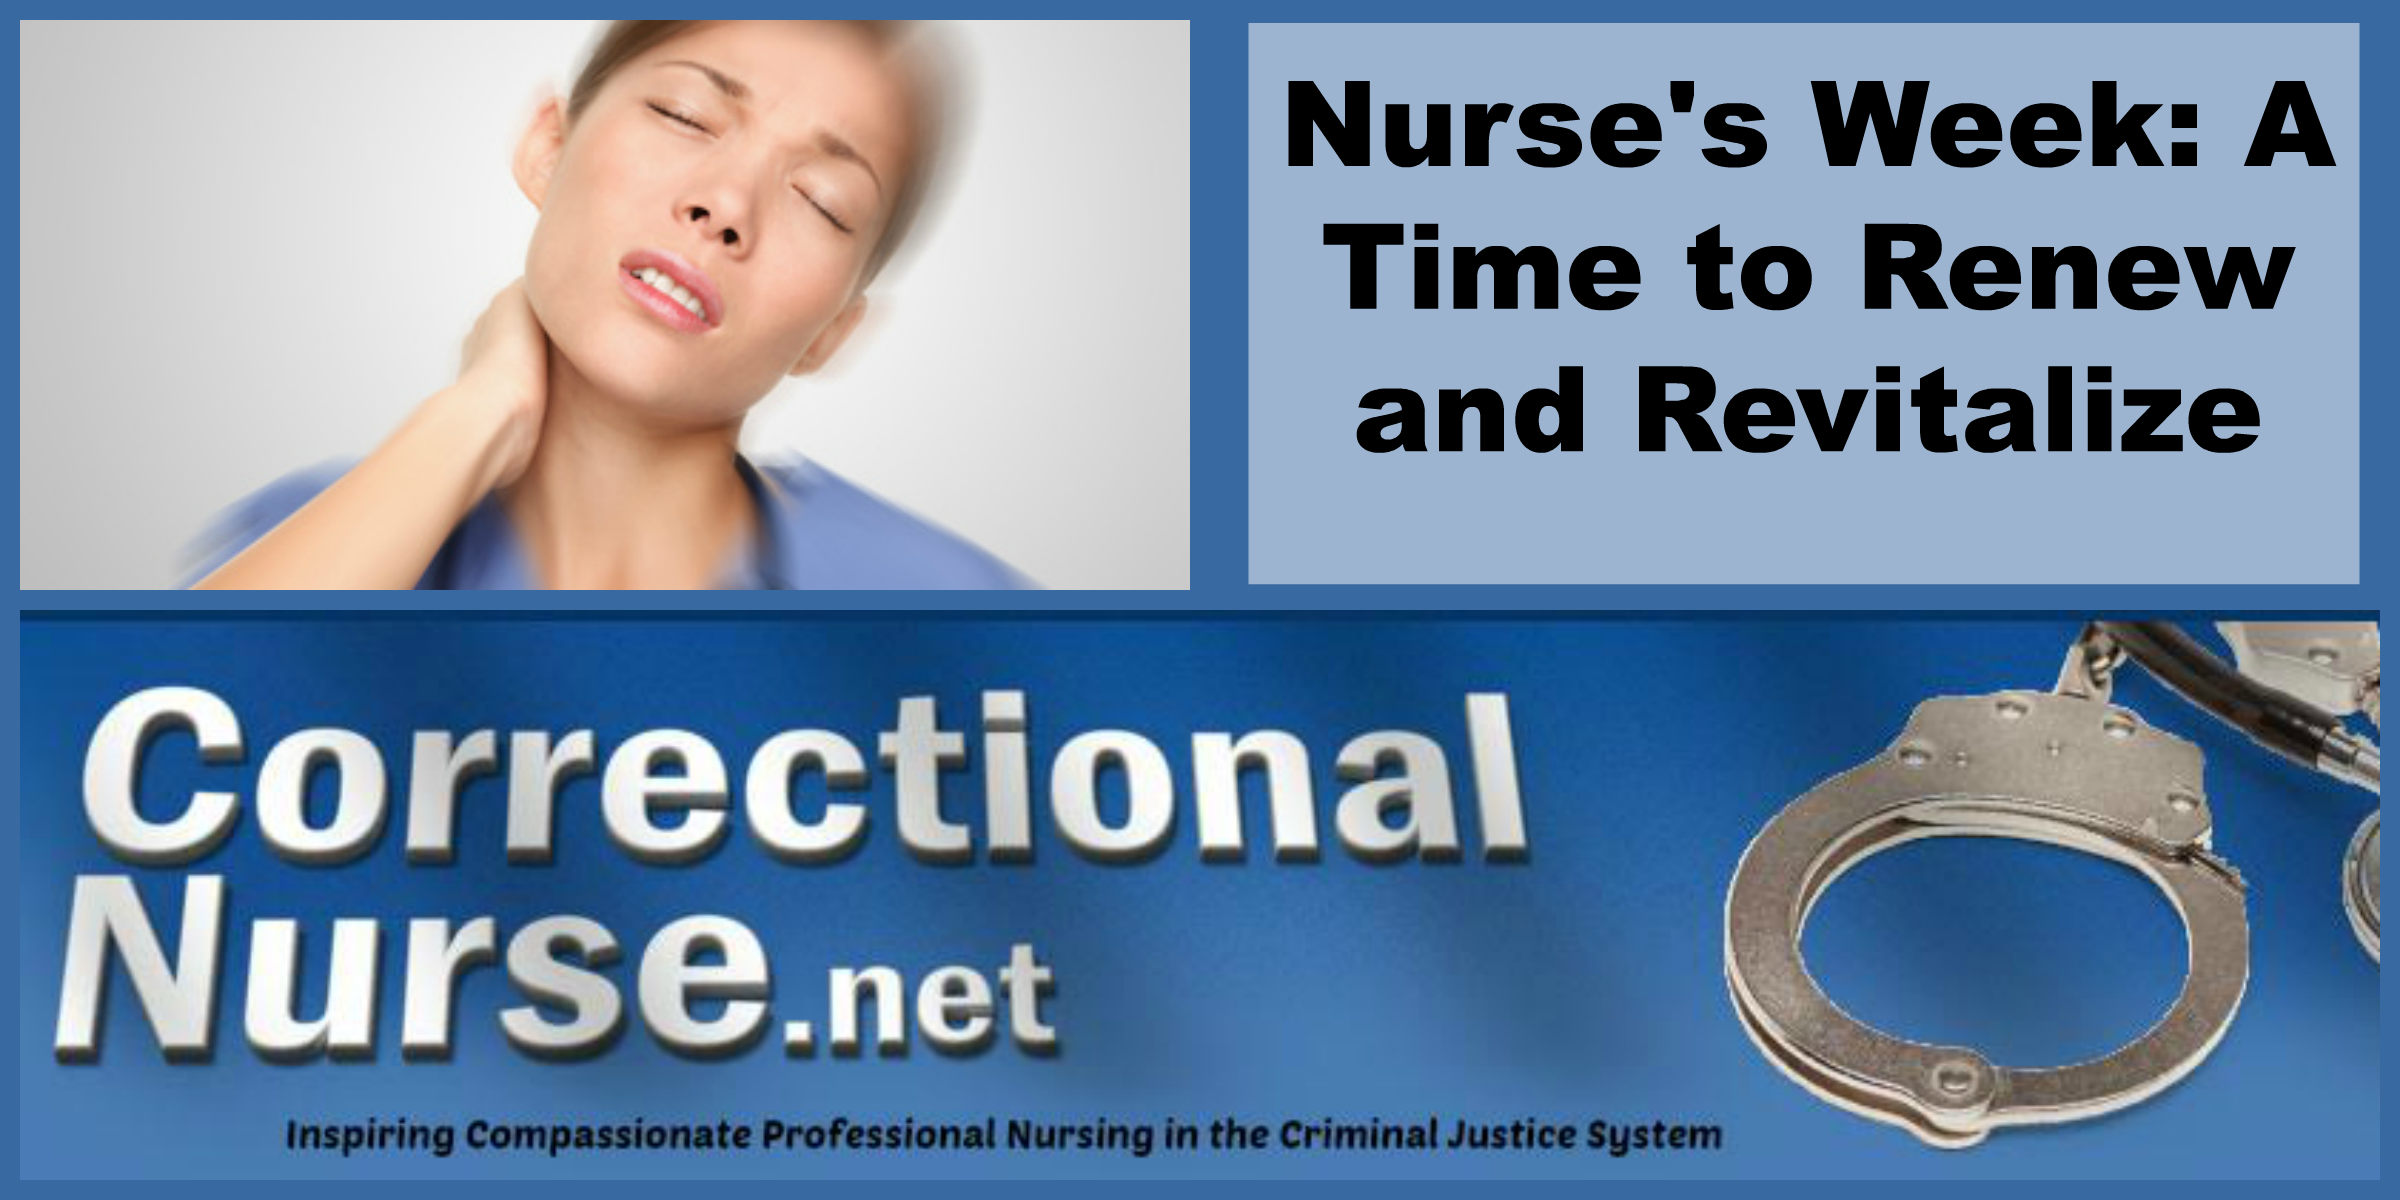 Nurse’s Week: A Time to Renew and Revitalize